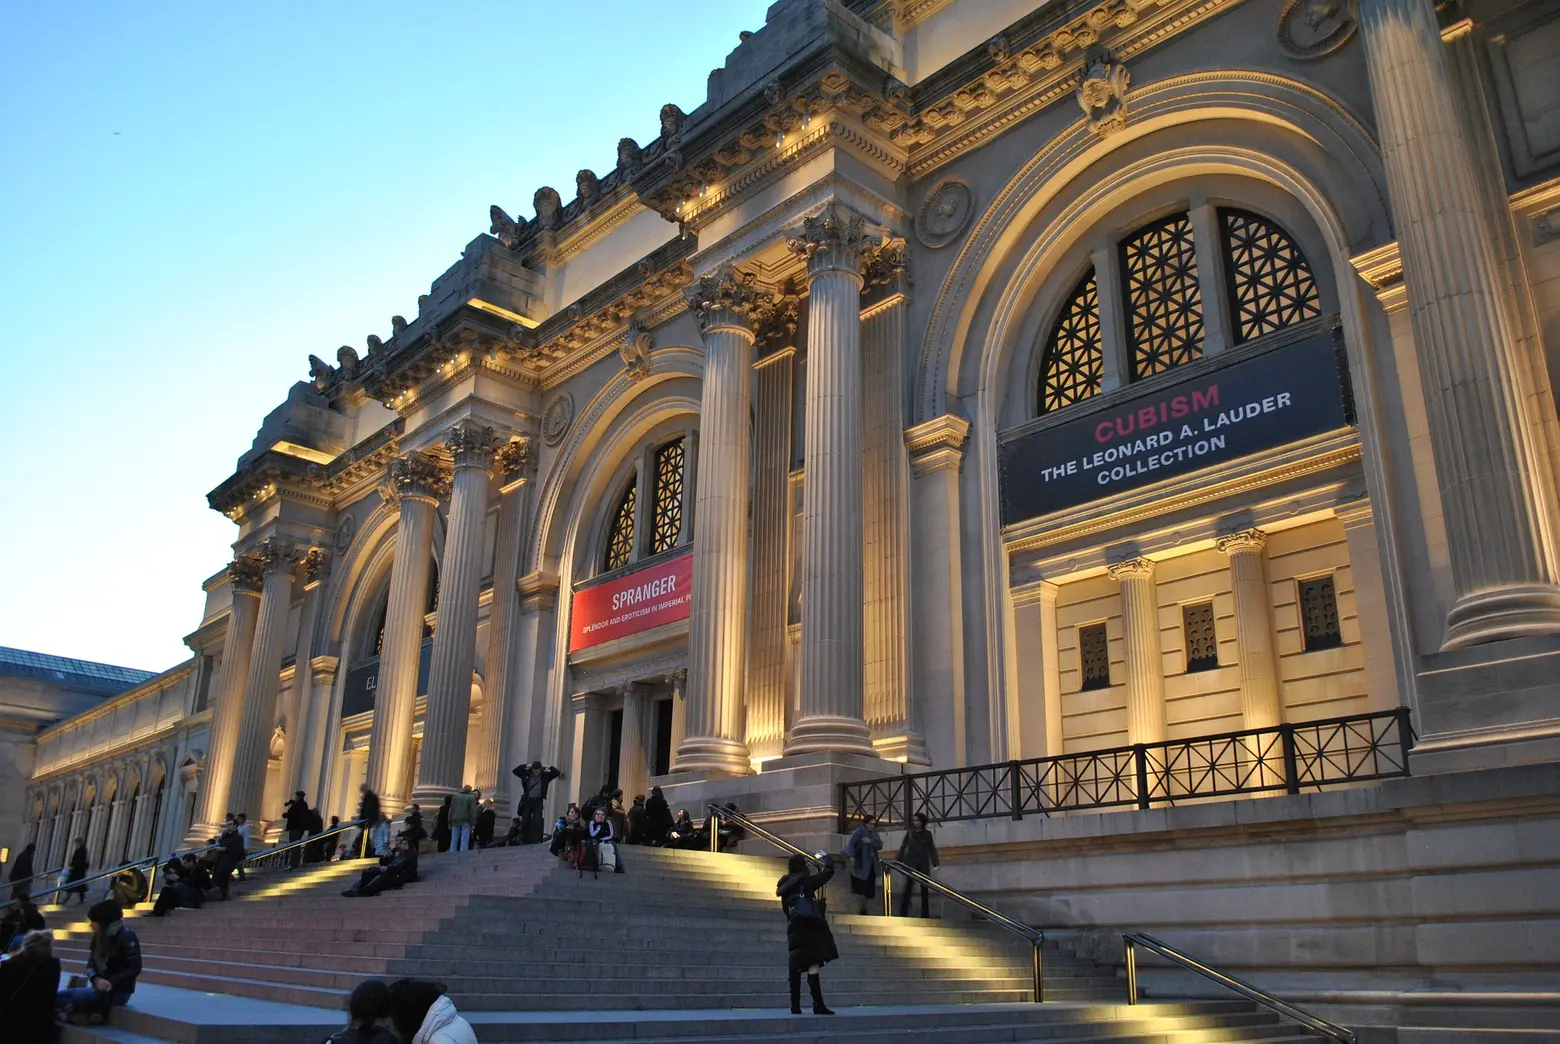 Petition launches against the Met’s plan to sell art amidst $150M deficit